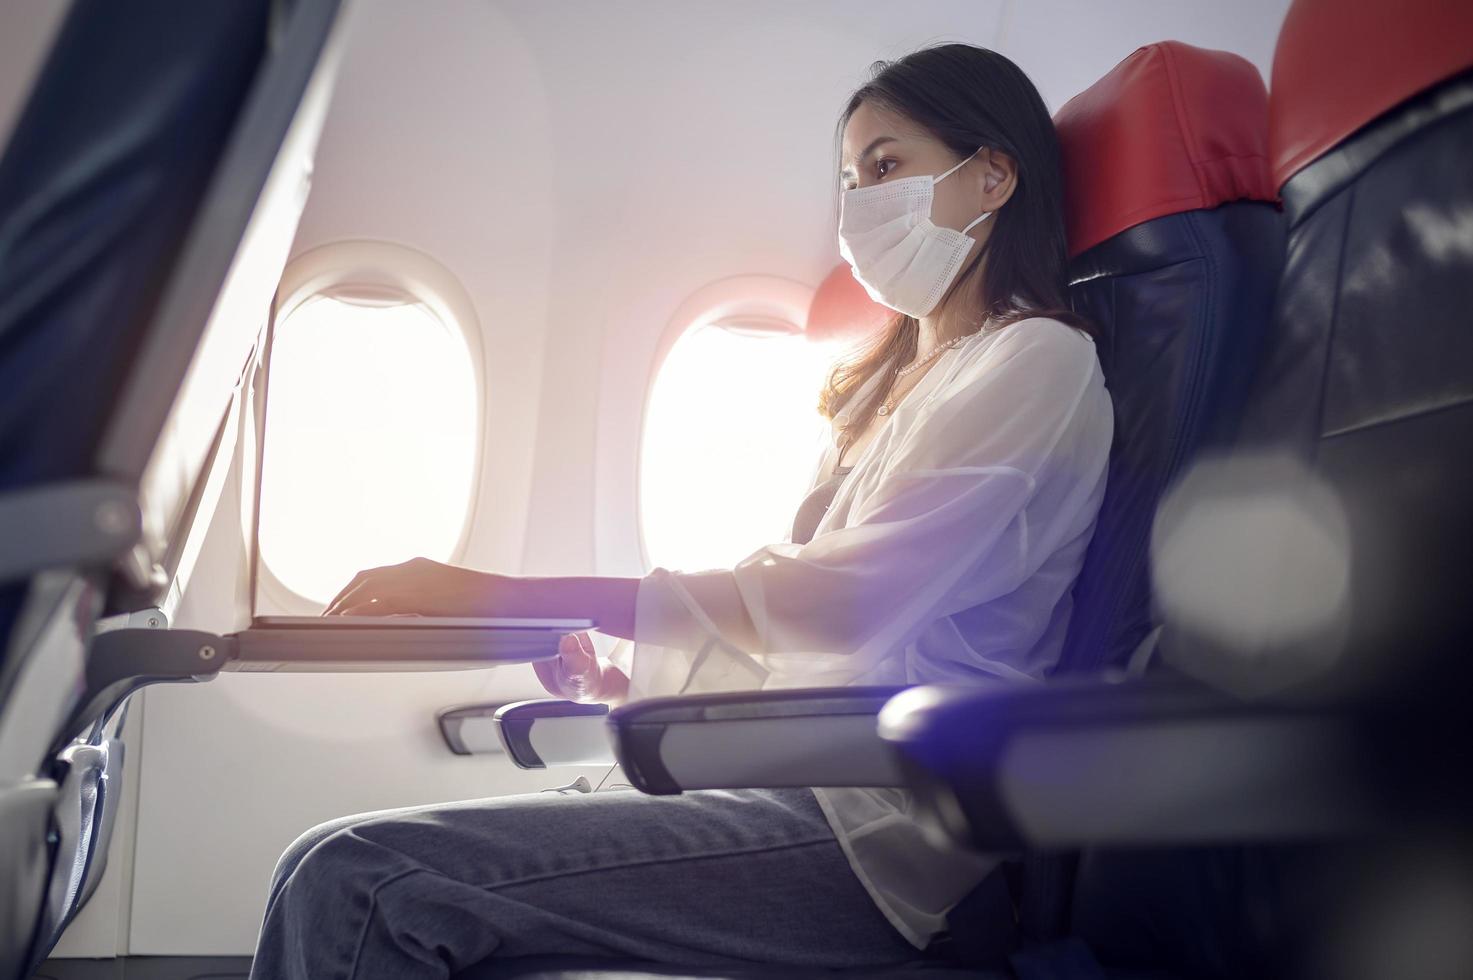 Young woman wearing face mask is using smartphone onboard, New normal travel after covid-19 pandemic concept photo